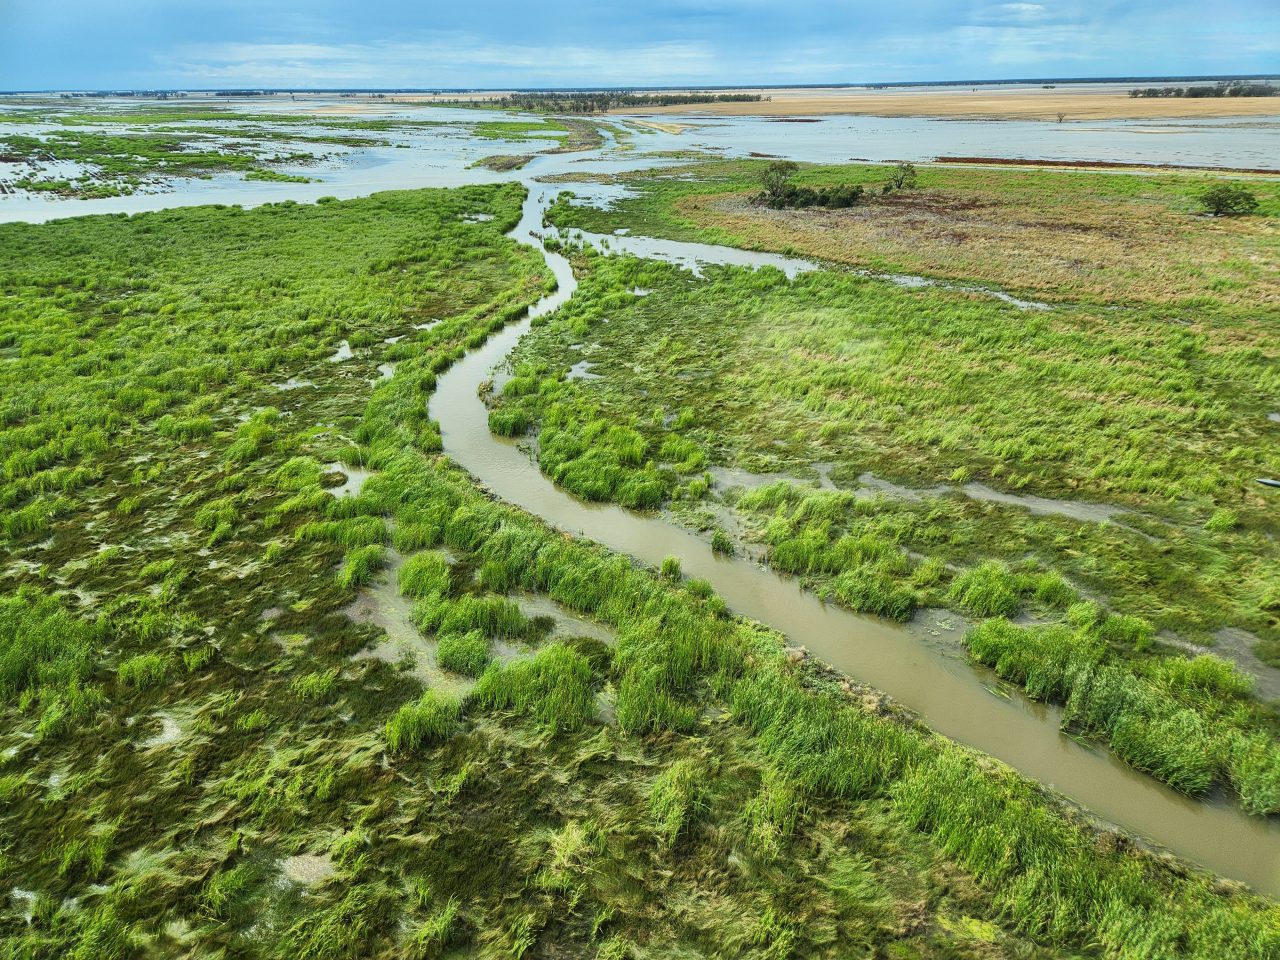 Aerial photo of a wetland that has formed channels in reed covered landscape